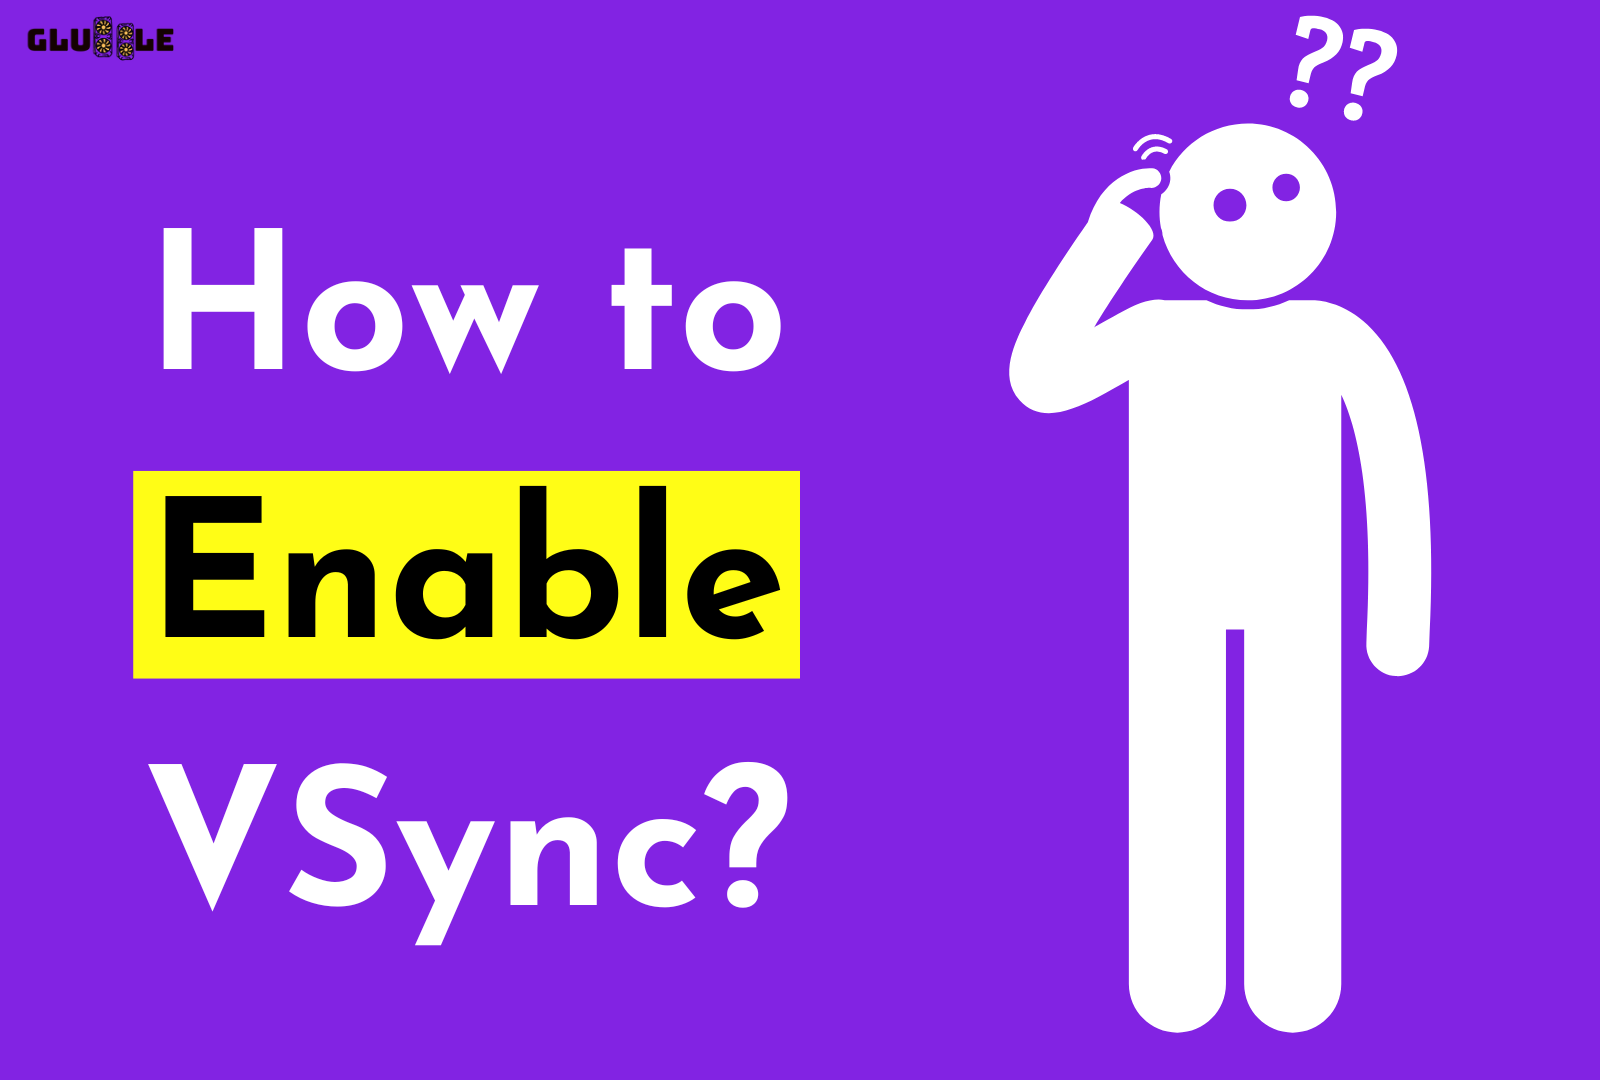 C:\Users\Mohsin\Downloads\how to enable vsync.png